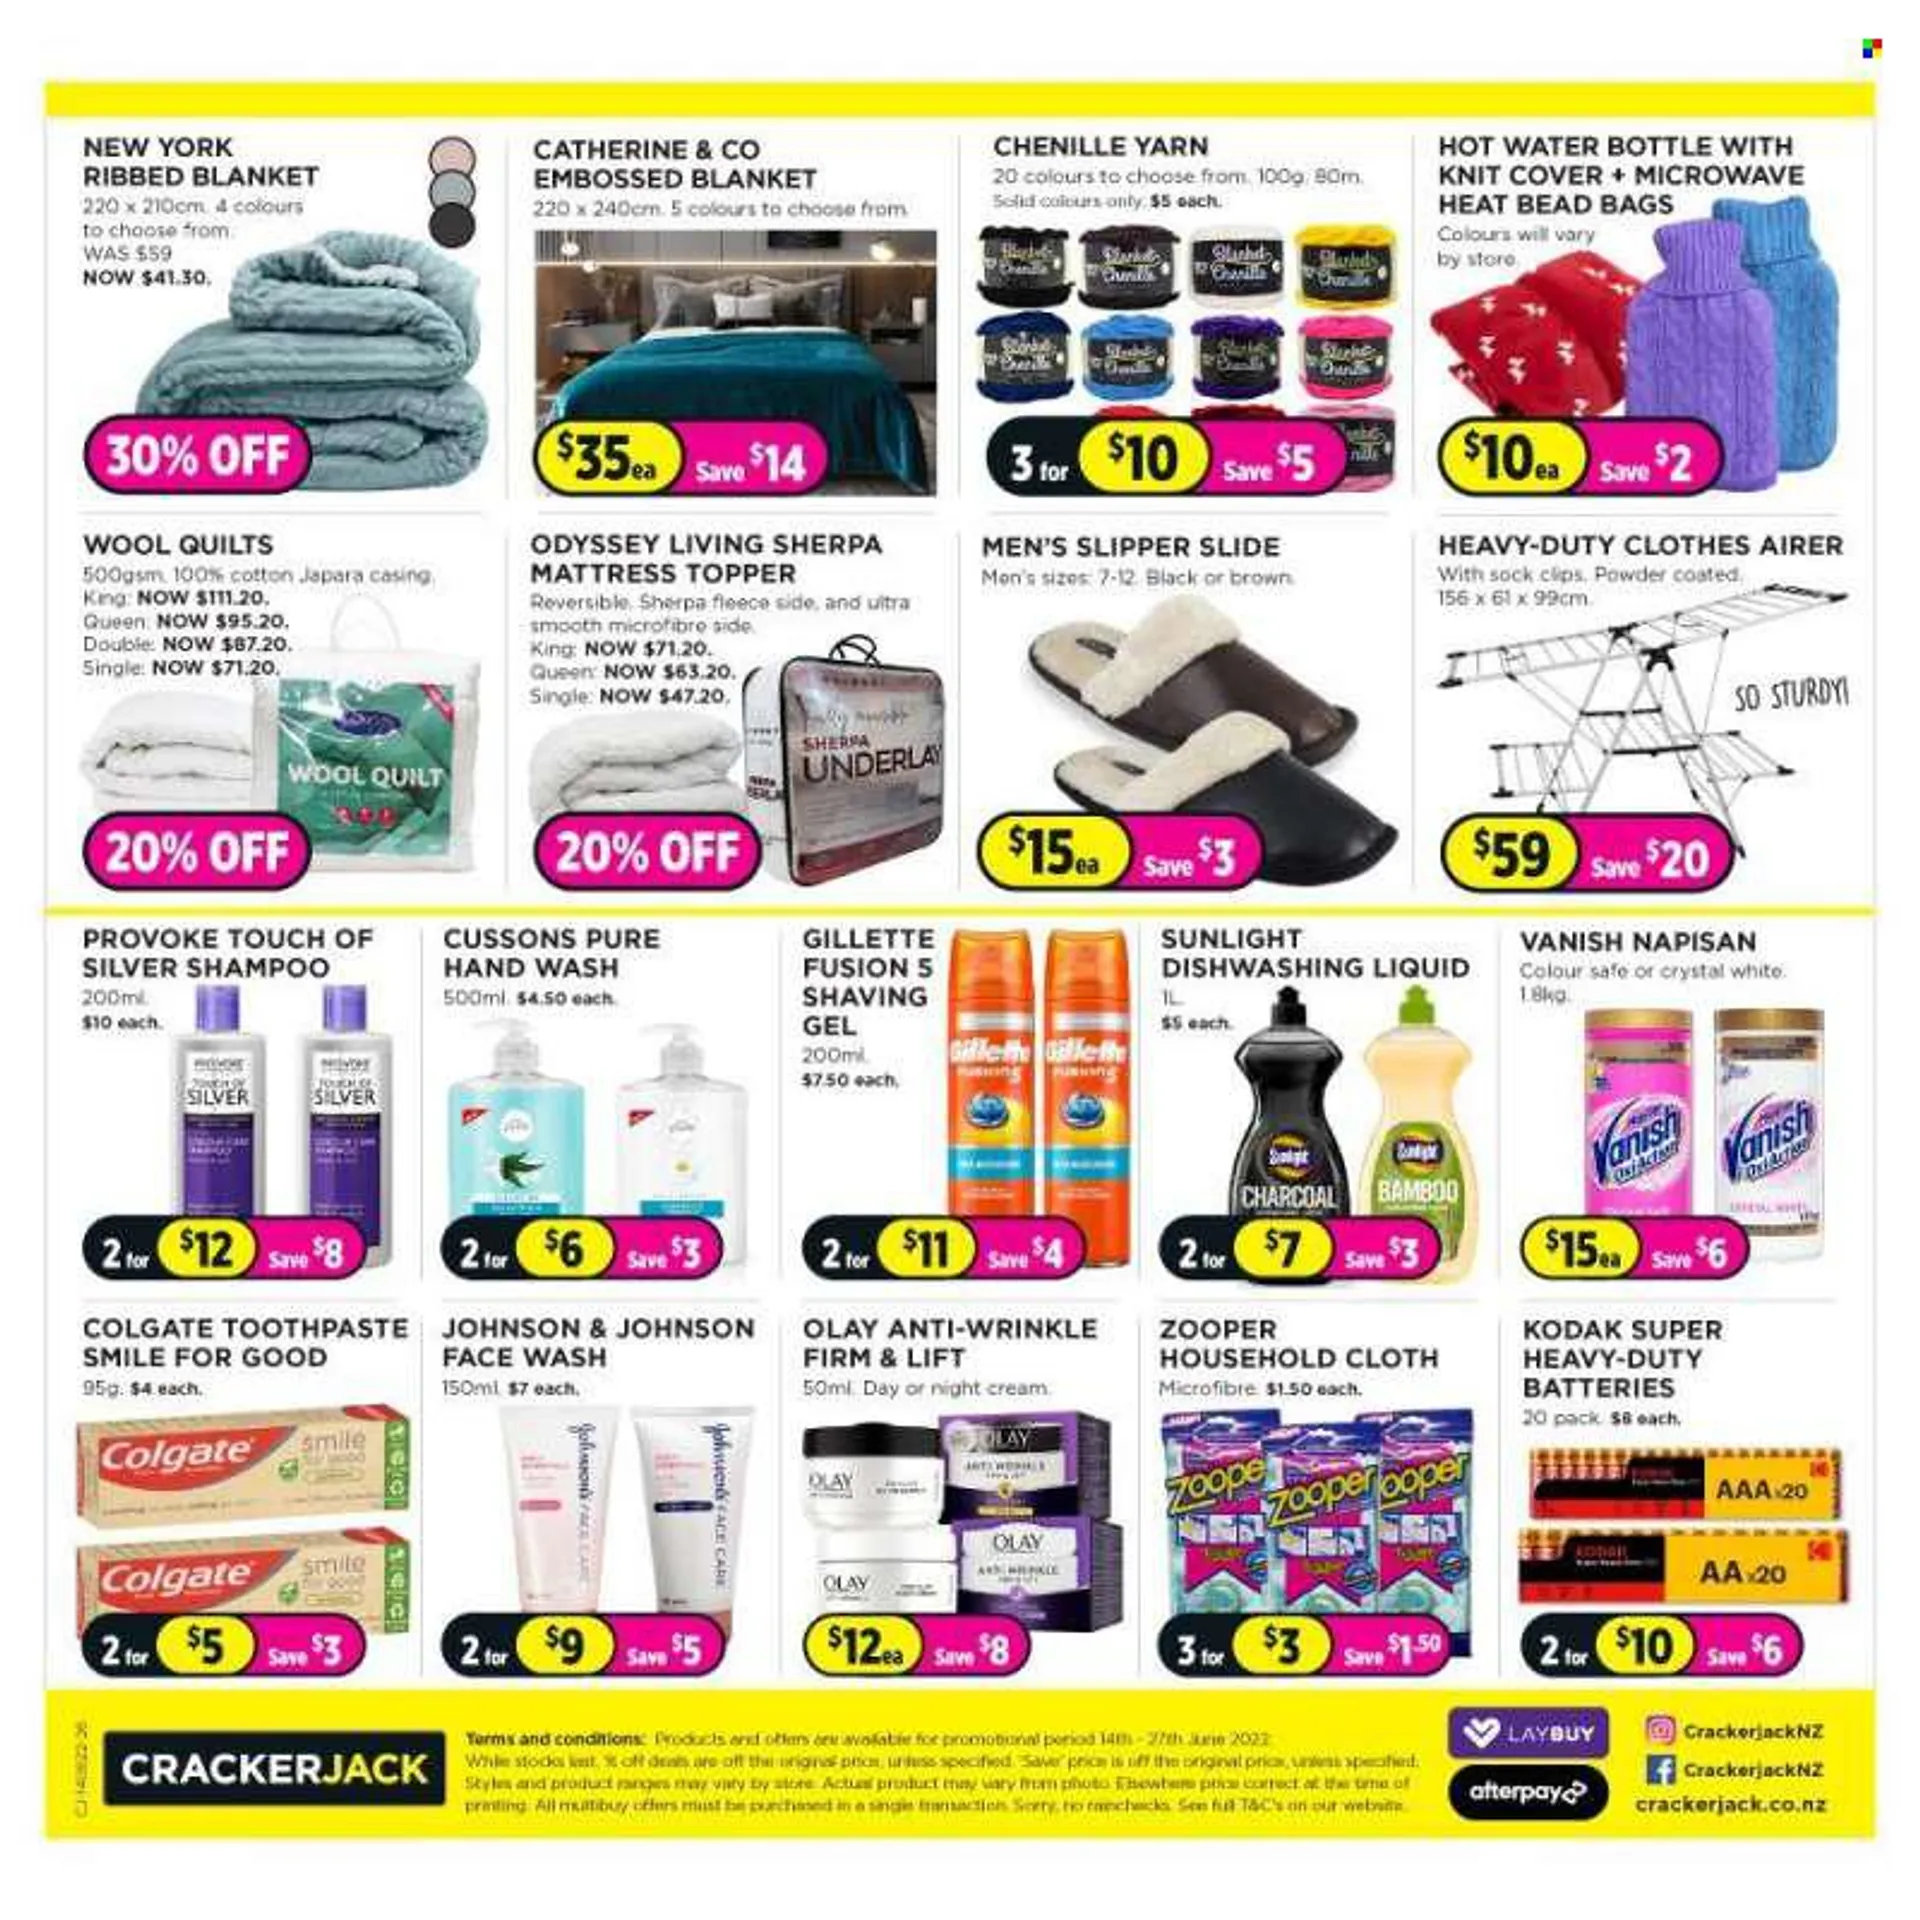 Crackerjack mailer - 14.06.2022 - 27.06.2022 - Sales products - Johnsons, Vanish, Sunlight, dishwashing liquid, shampoo, hand wash, face gel, Colgate, toothpaste, night cream, Olay, face wash, Gillette, bag, battery, blanket, topper, quilt, wool quilt, ma